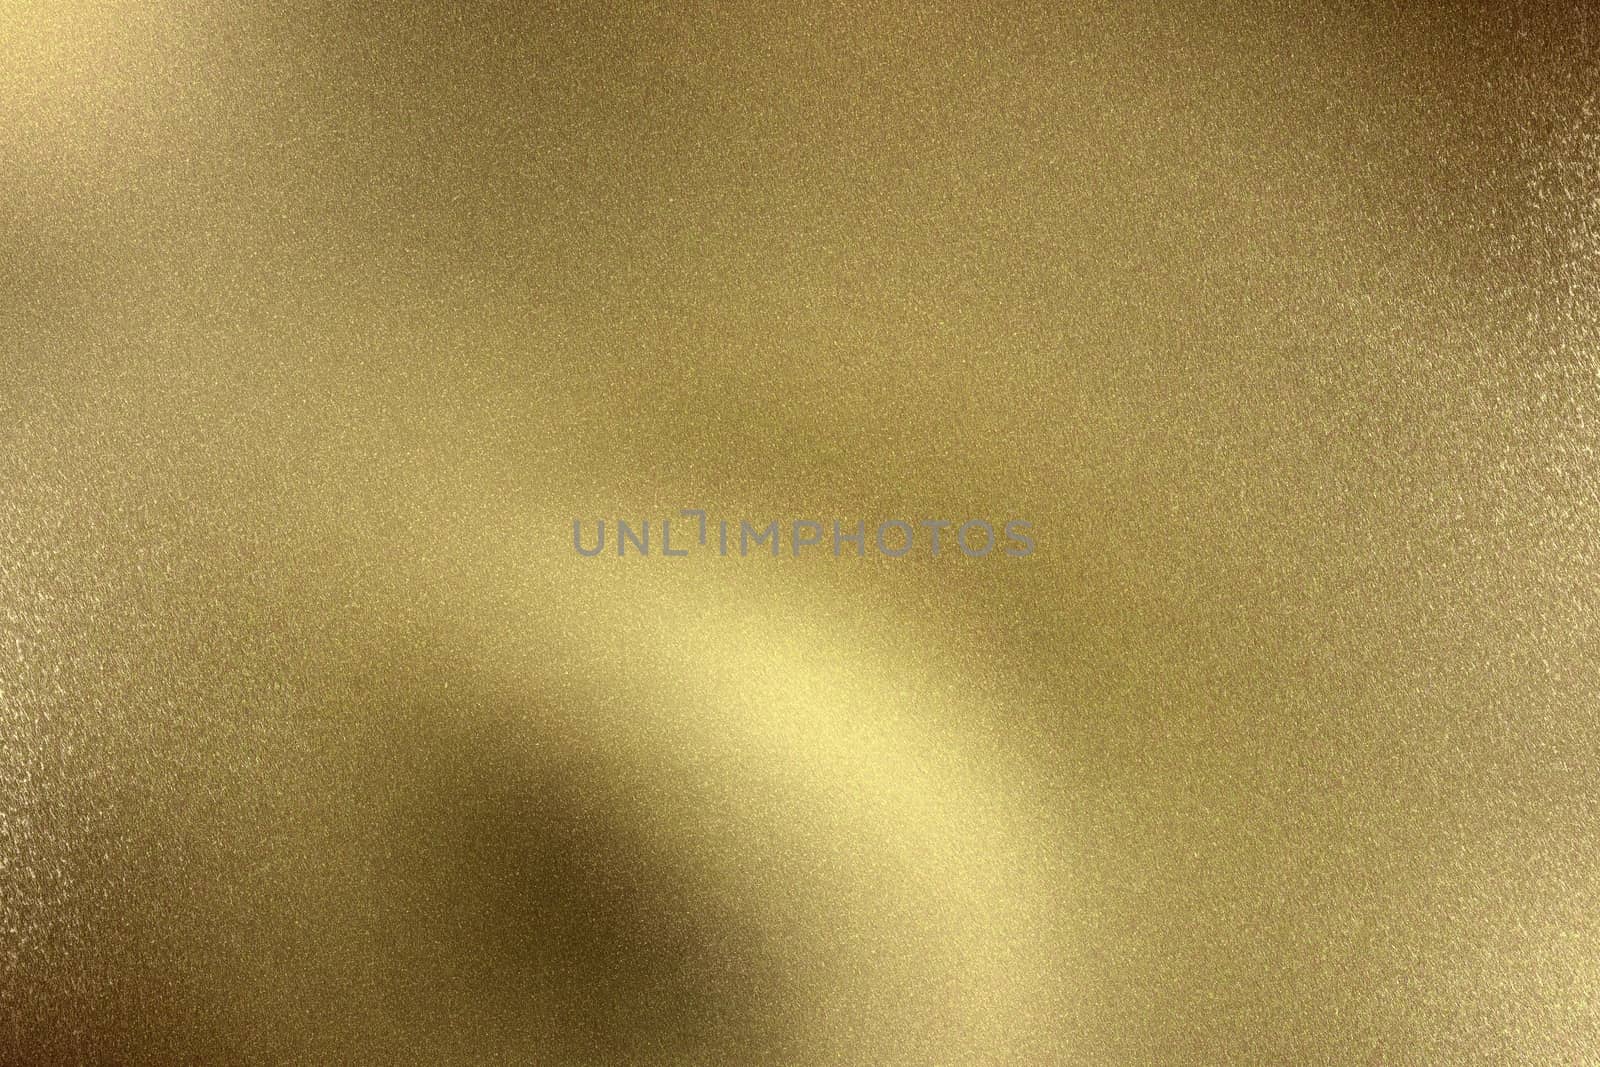 Glowing gold wave metal plate, abstract texture background